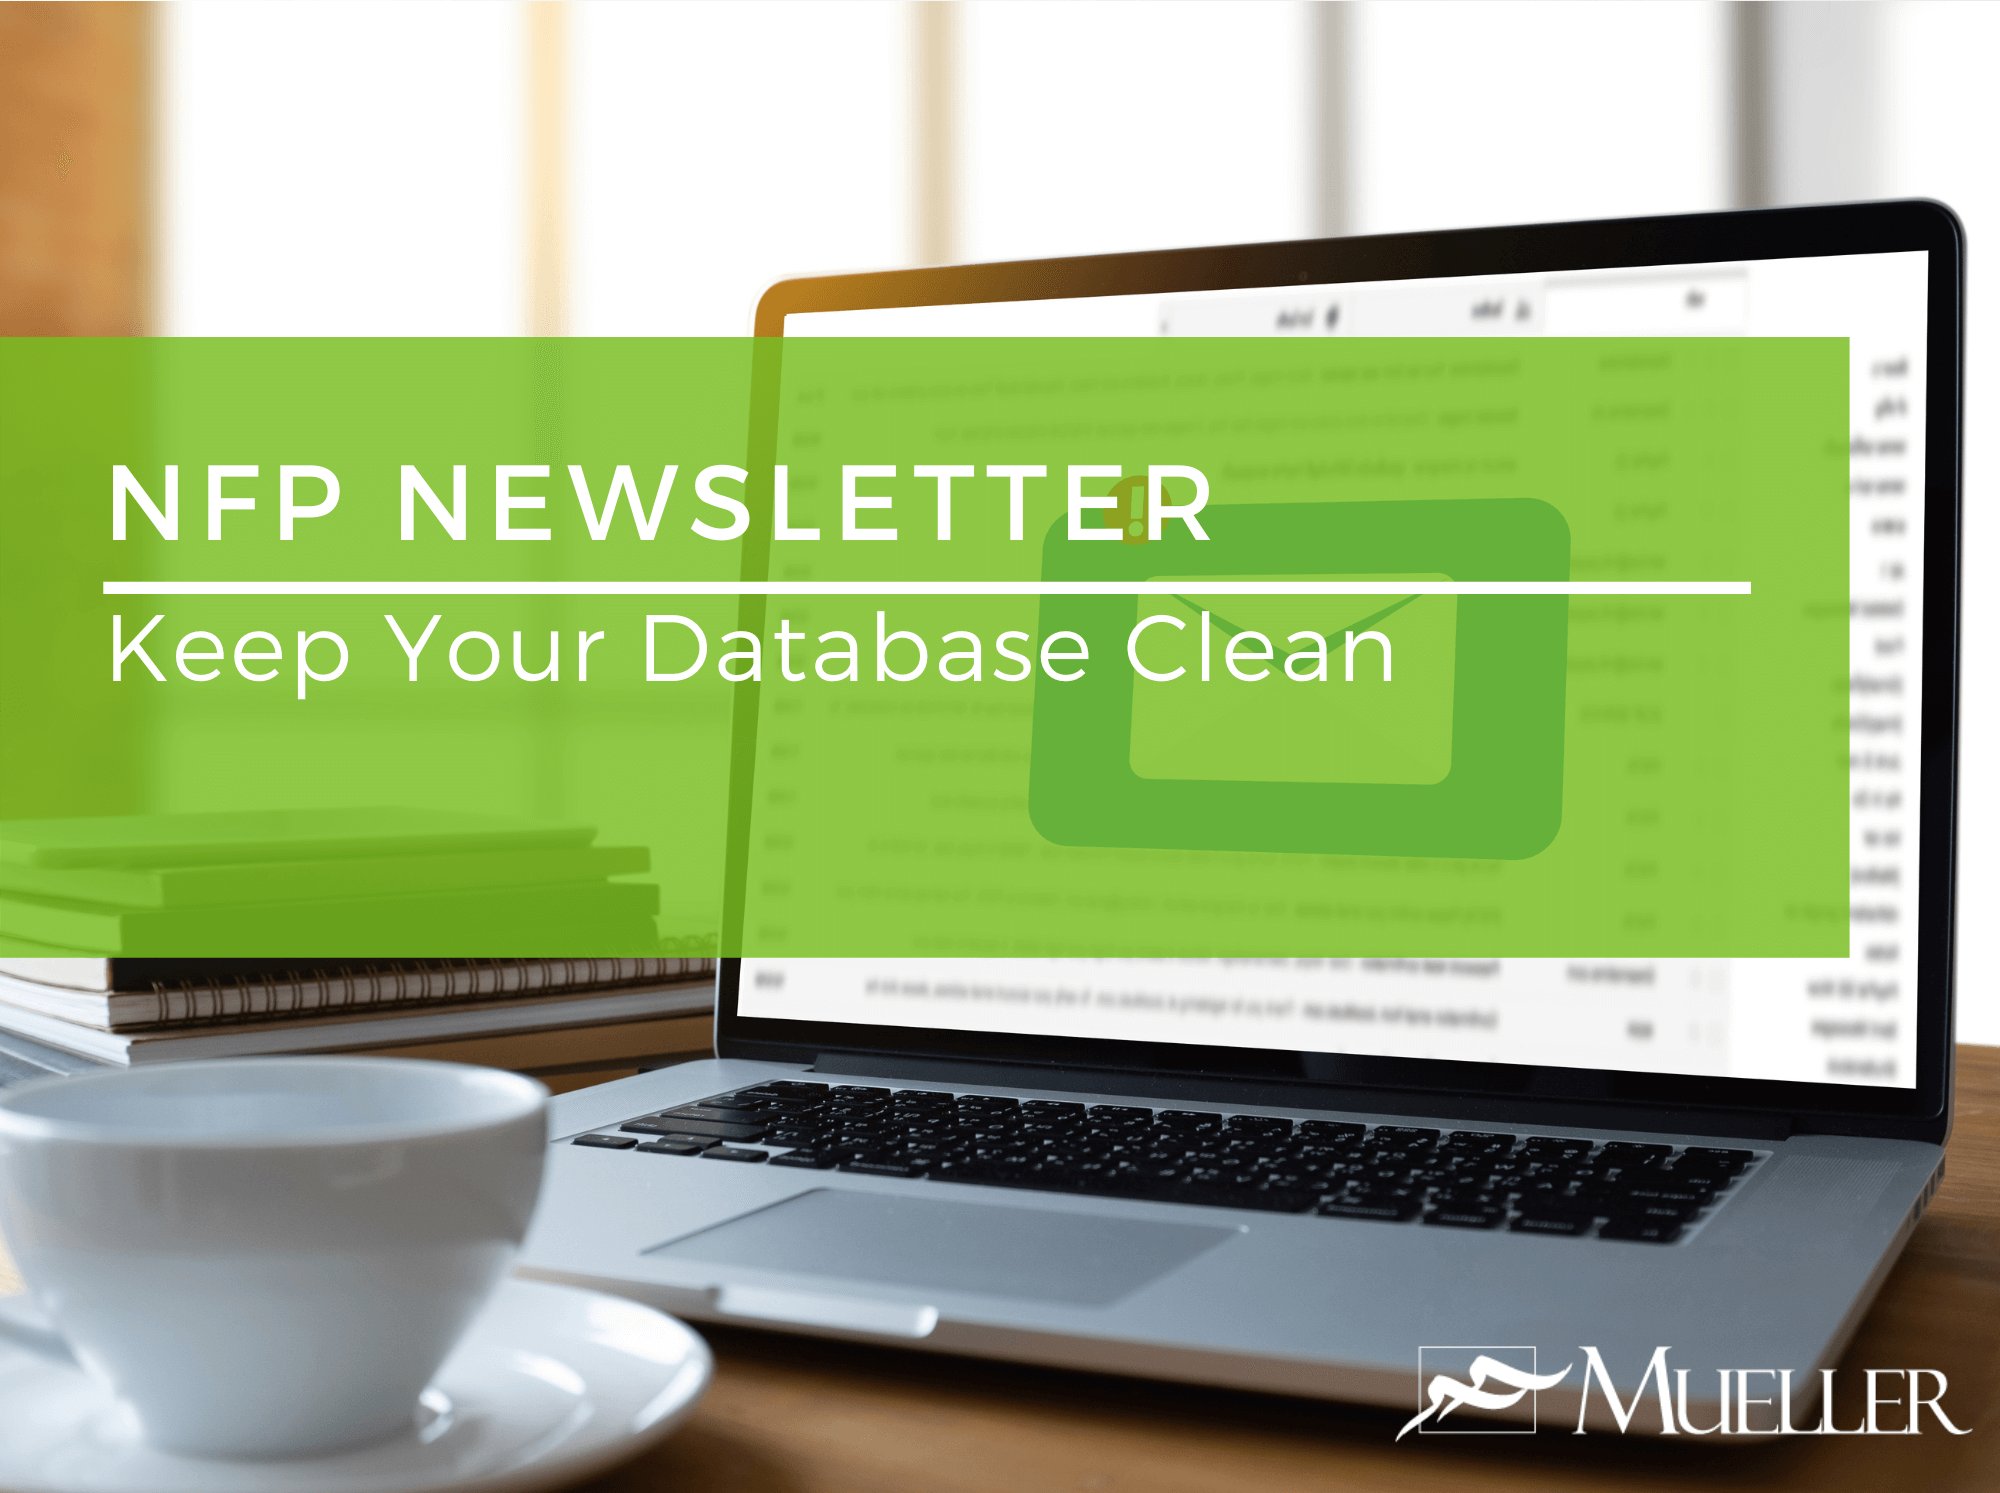 NFP Newsletter - Keep Your Database Clean